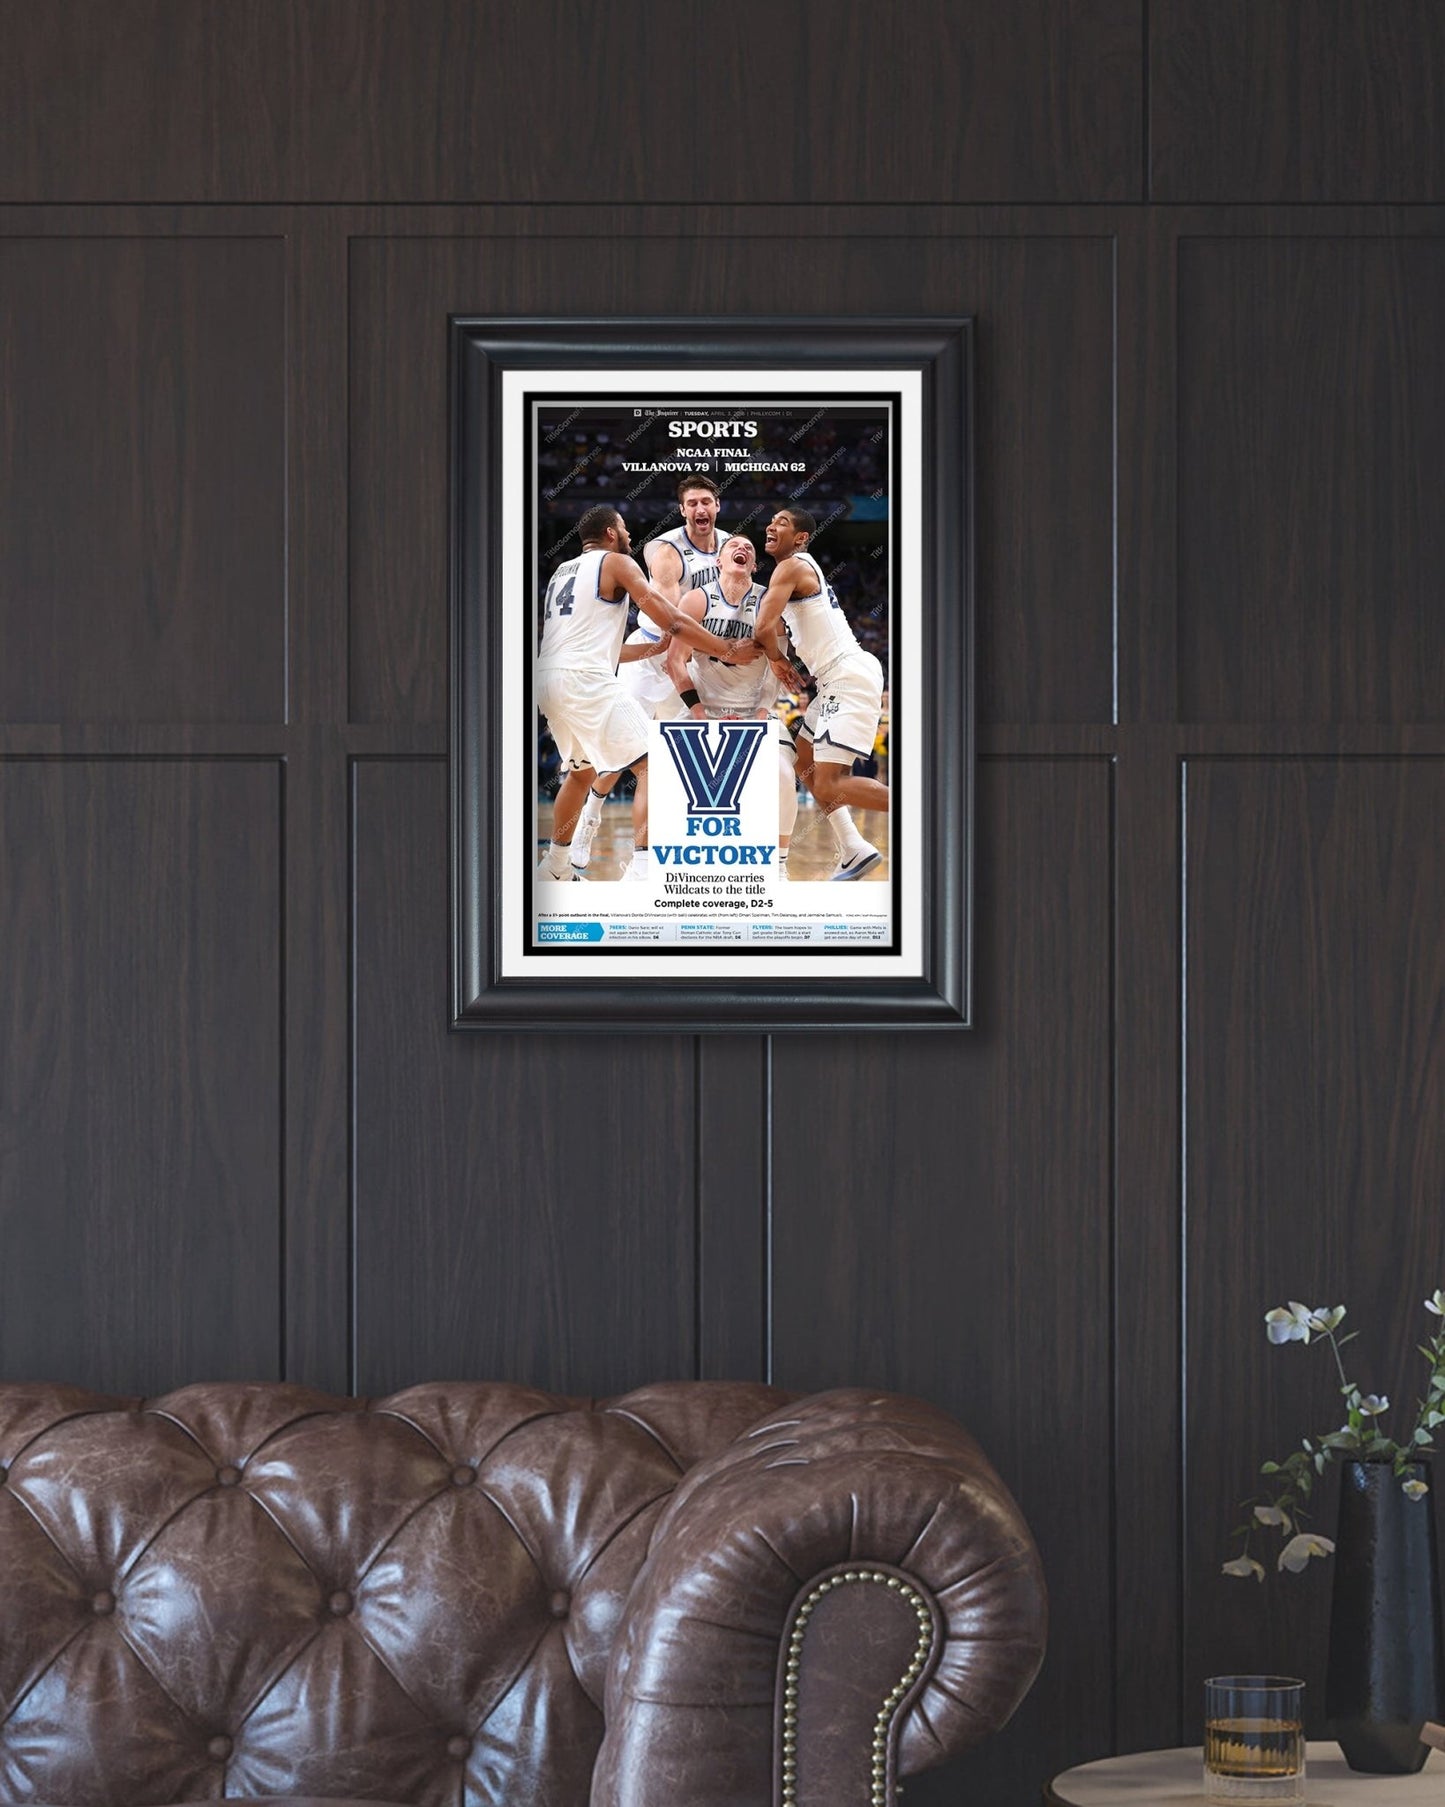 2018 Villanova Wildcats NCAA College Basketball Champions Framed Front Page Newspaper Print - Title Game Frames